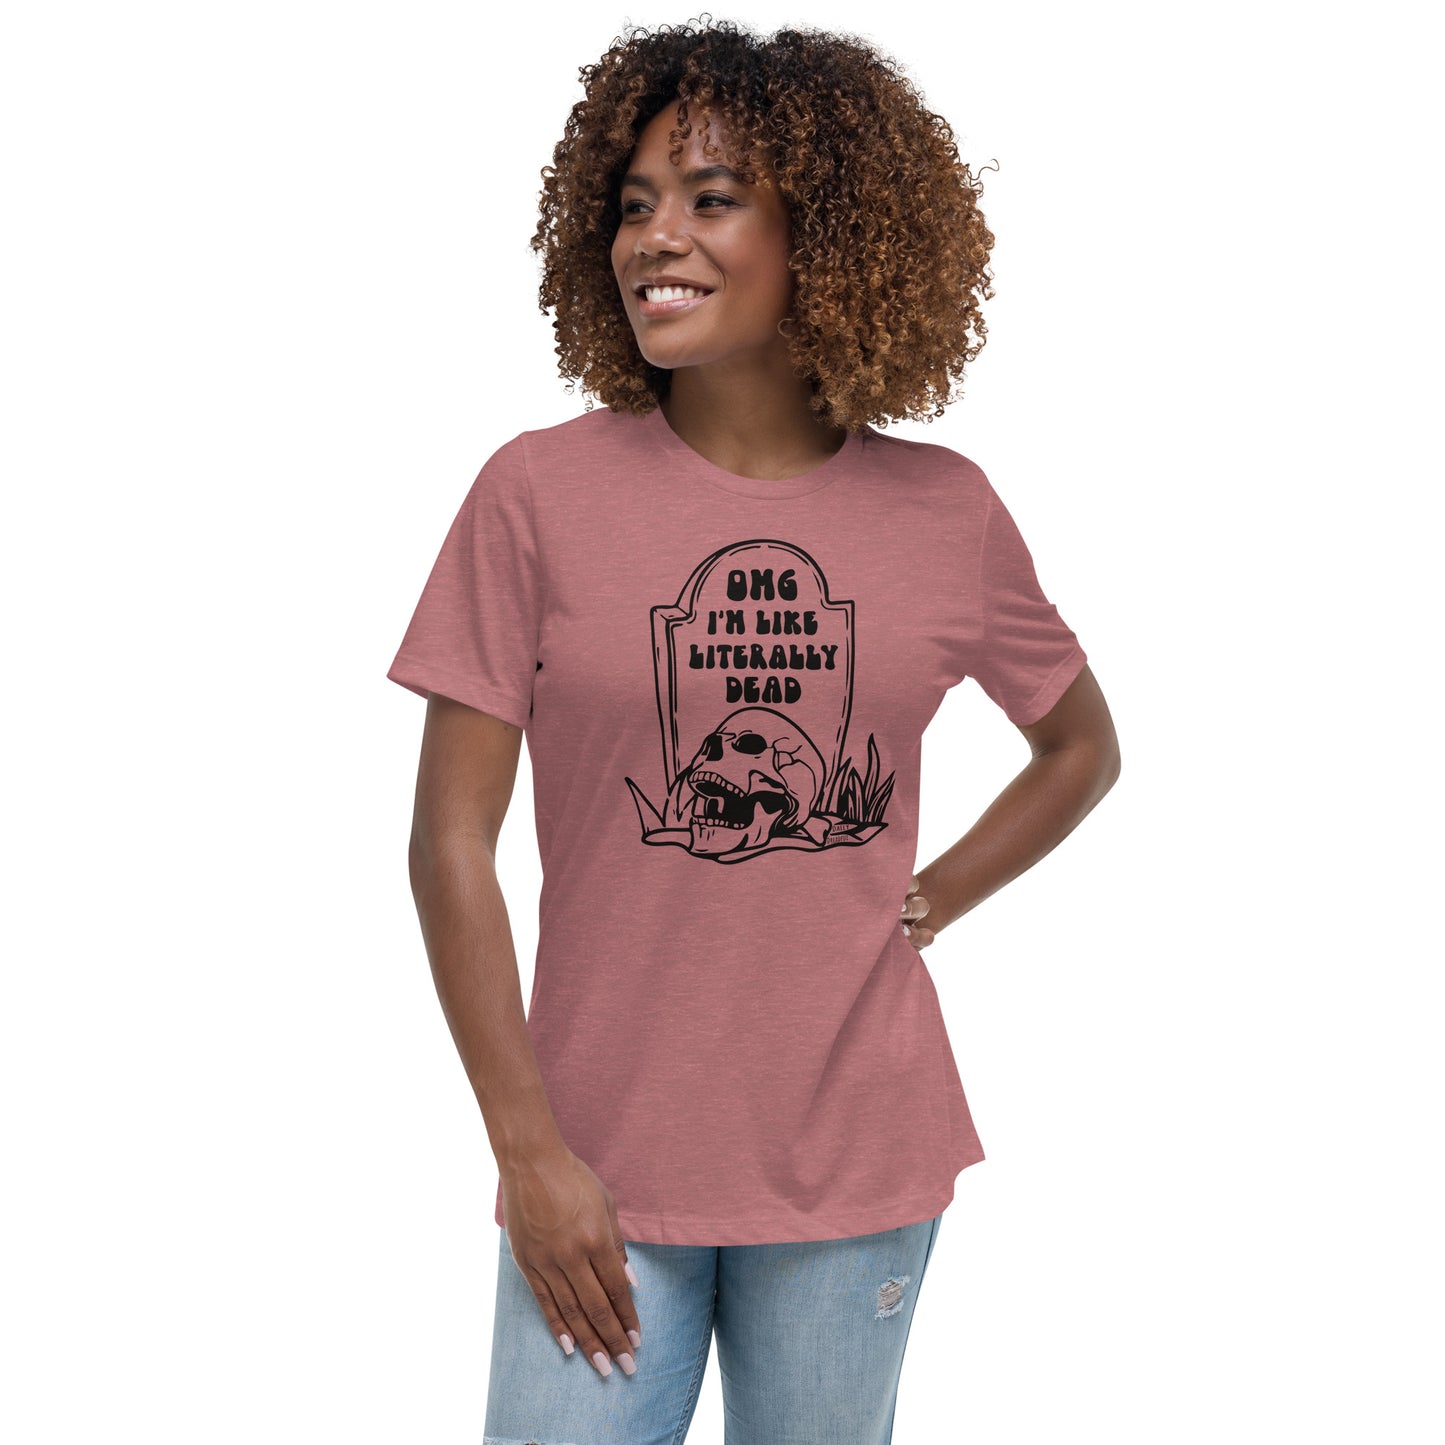 heather mauve "OMG Dead" women's relaxed t-shirt, women's tee from daily dreadful